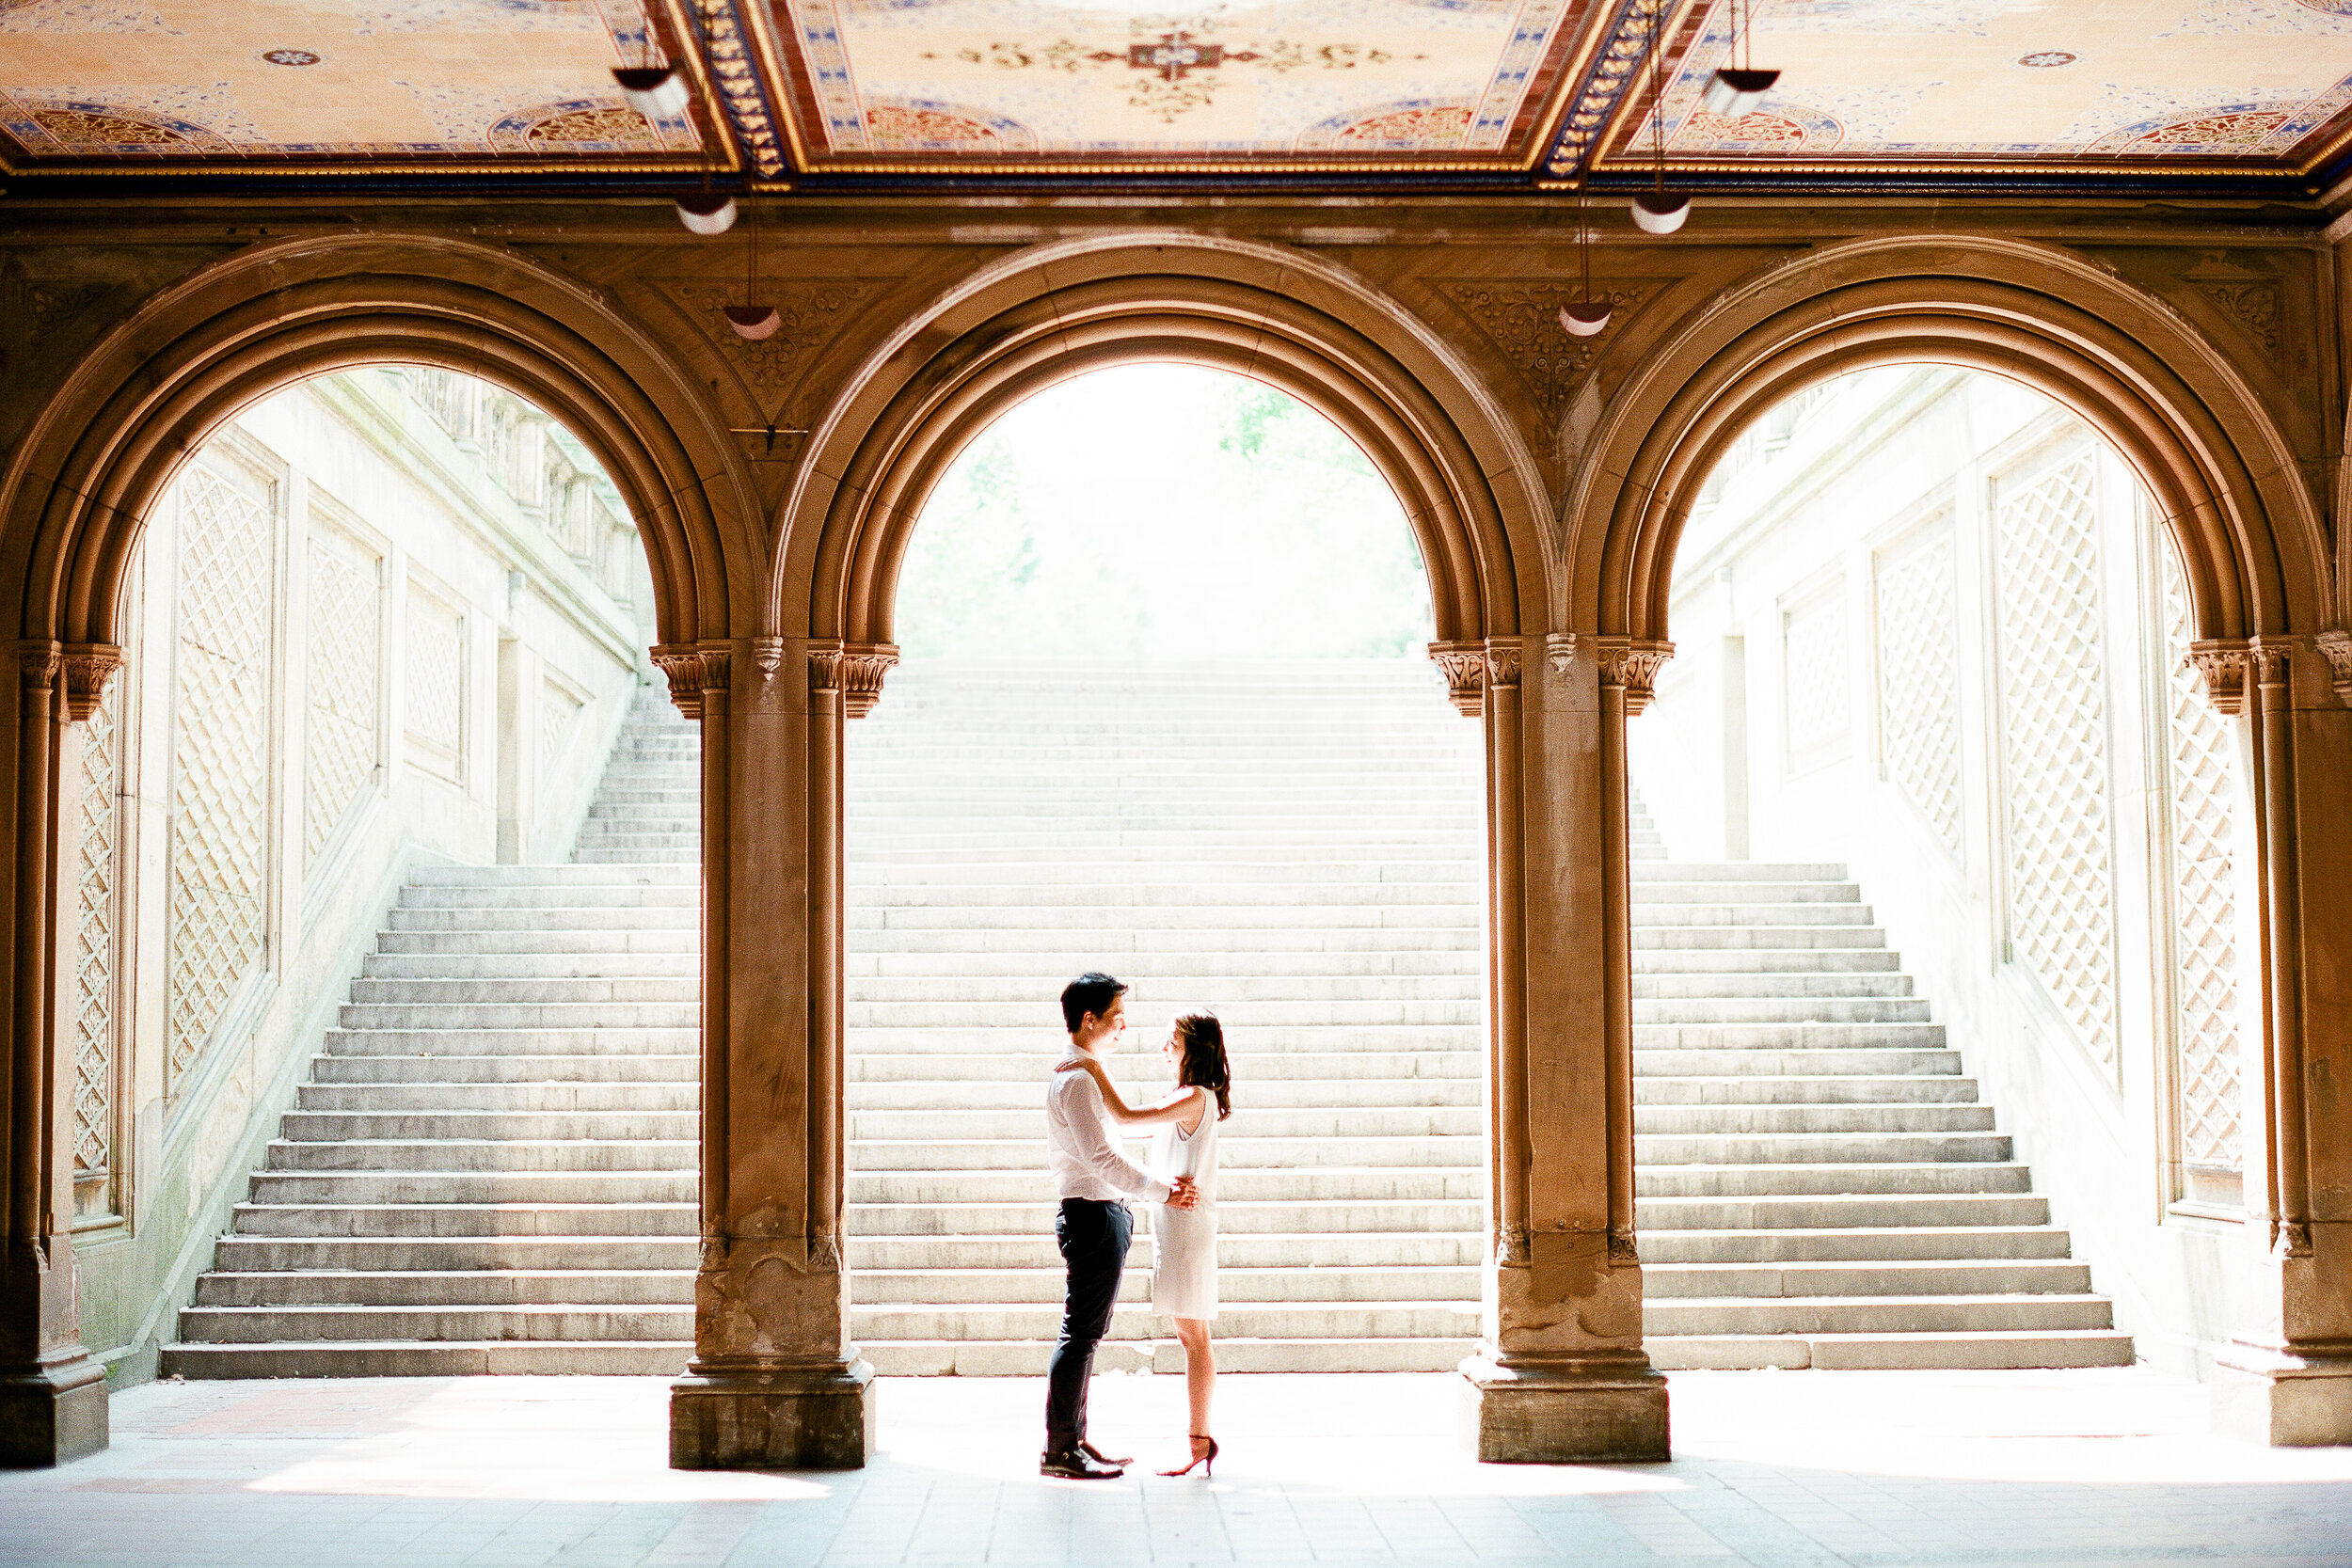 Under the Bethesda Terrace in Central Park